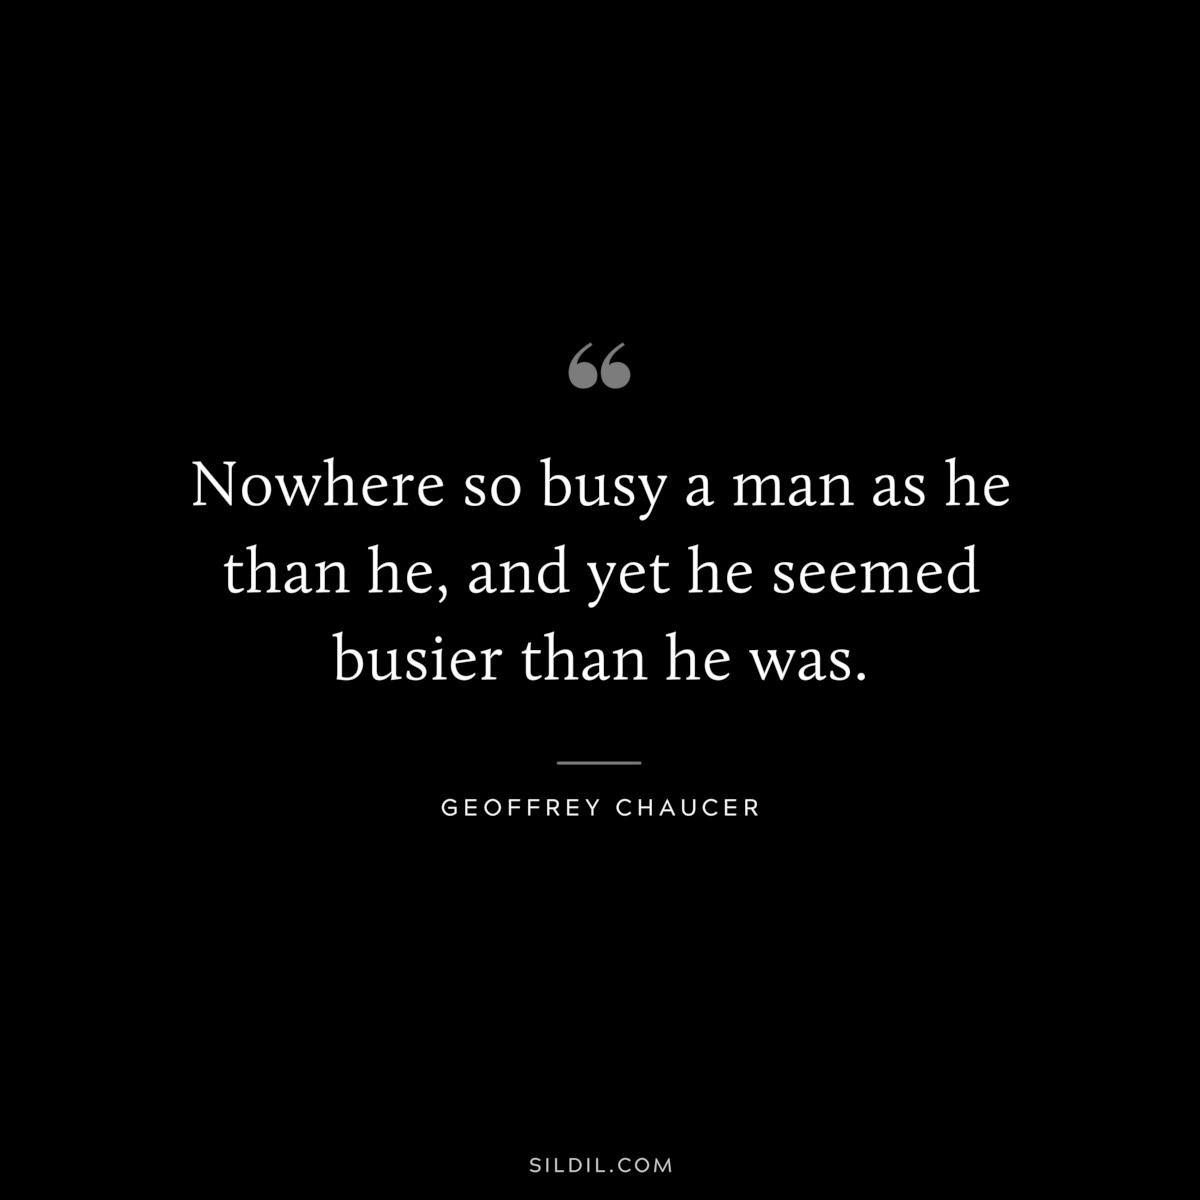 Nowhere so busy a man as he than he, and yet he seemed busier than he was. ― Geoffrey Chaucer